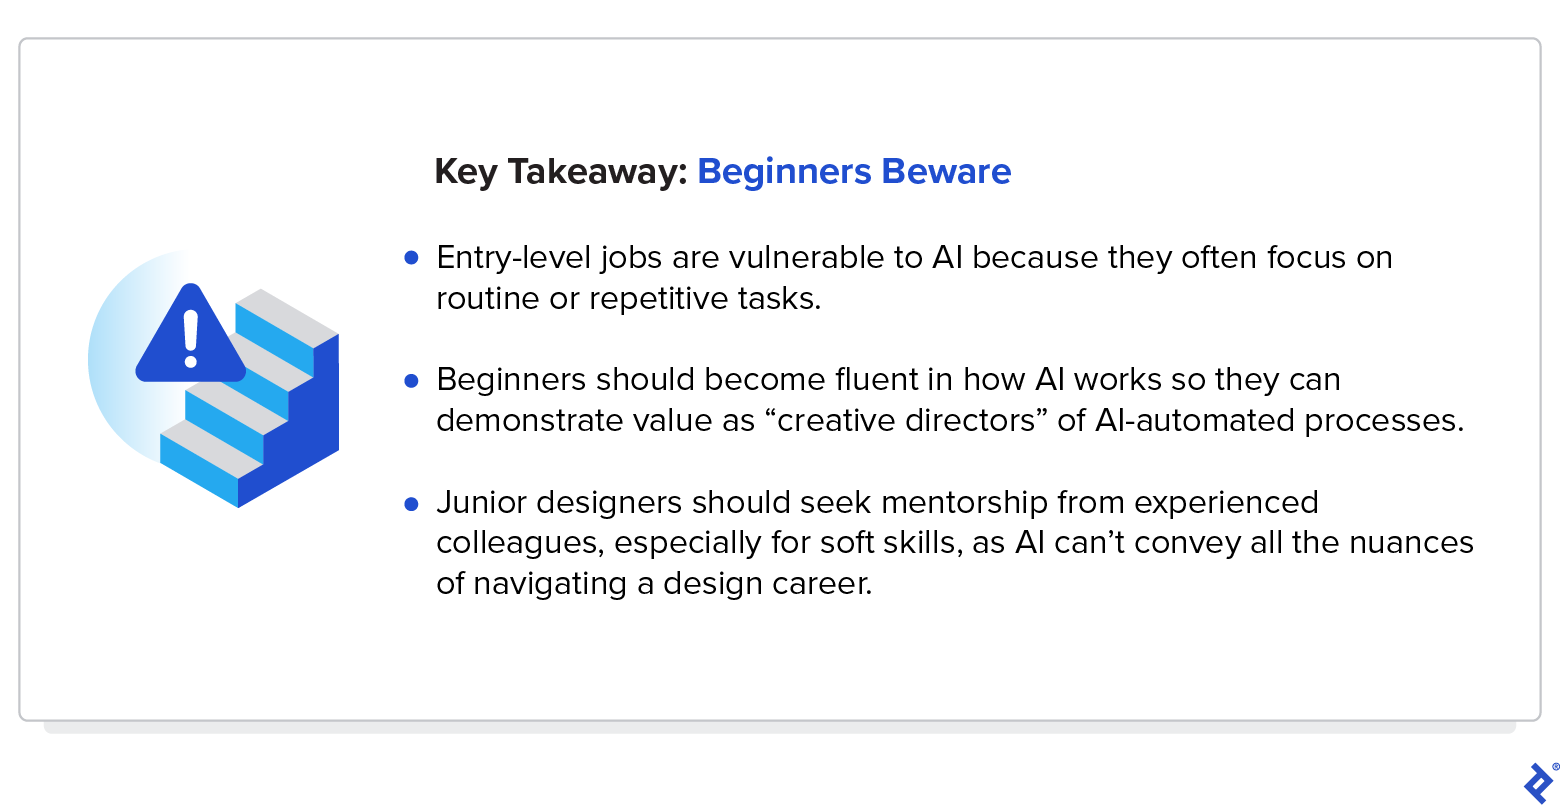 A key takeaway for beginner designers includes that they should become fluent in how AI works and also seek mentorship from colleagues.